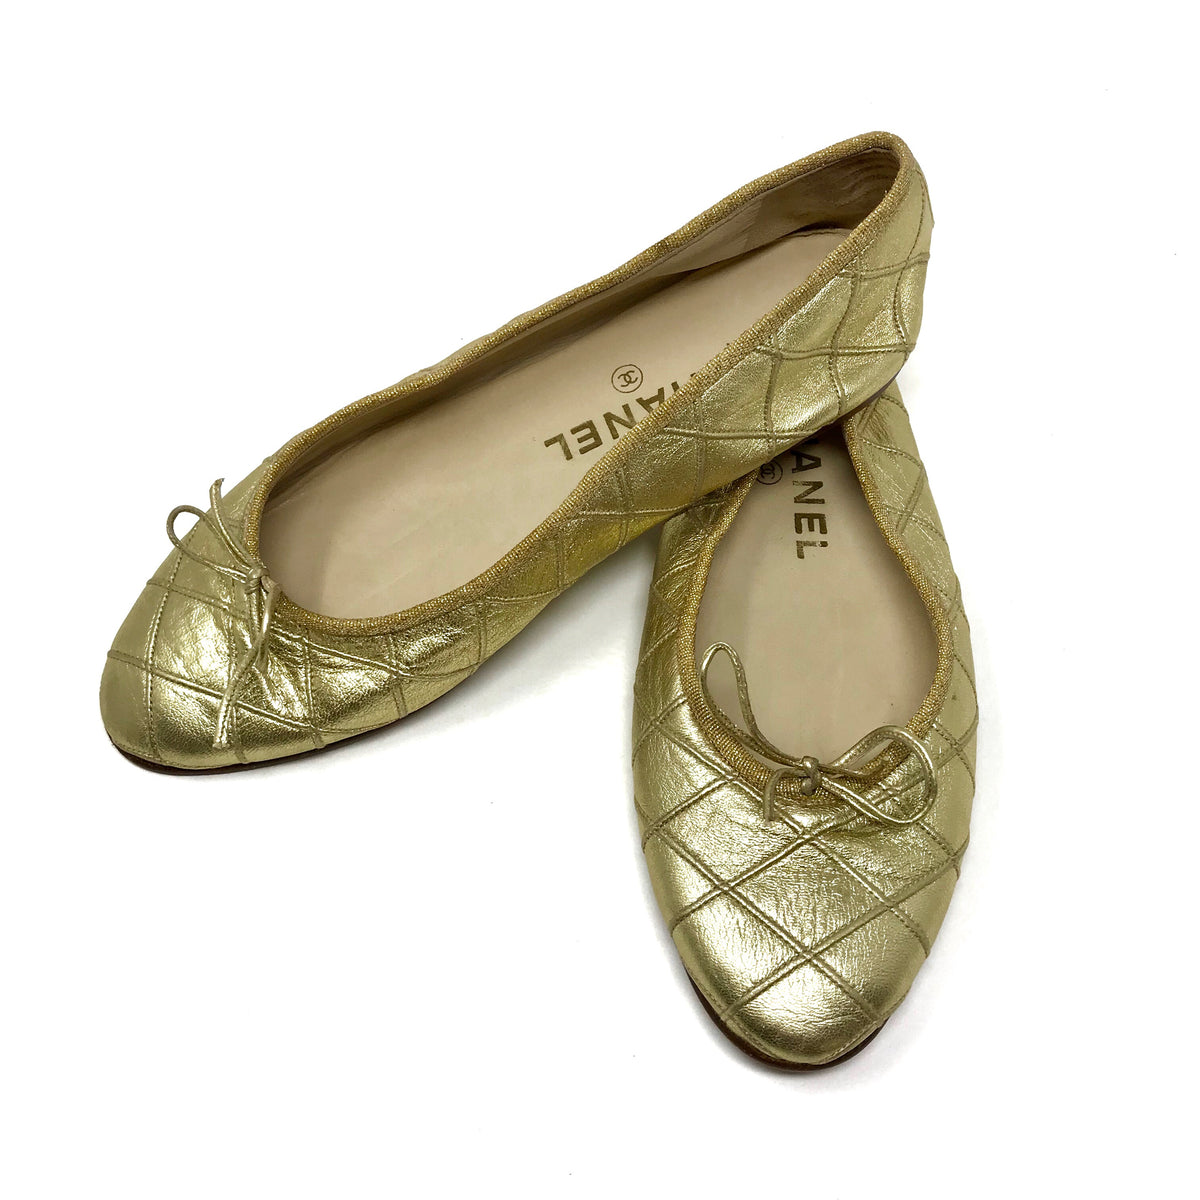 Chanel Gold Leather CC Bow Ballet Flats Size 36